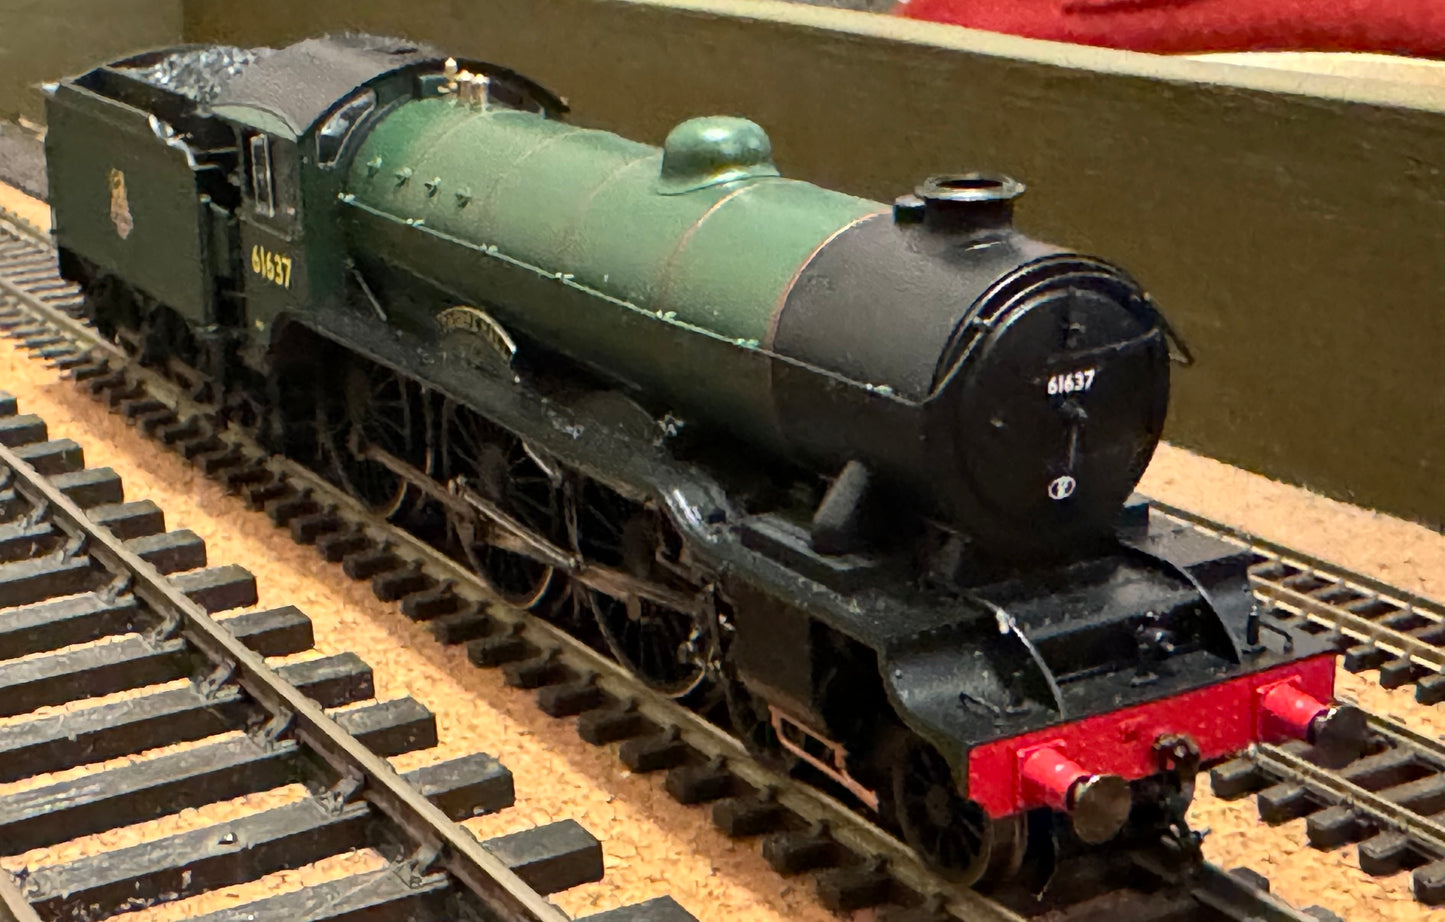 Hornby (OO) Ex London North Eastern Railway, B17/1 No.61637 “Thorpe Hall” in British Railways Lined Green (Shed Code 32B, Ipswich Depot) DCC Fitted.